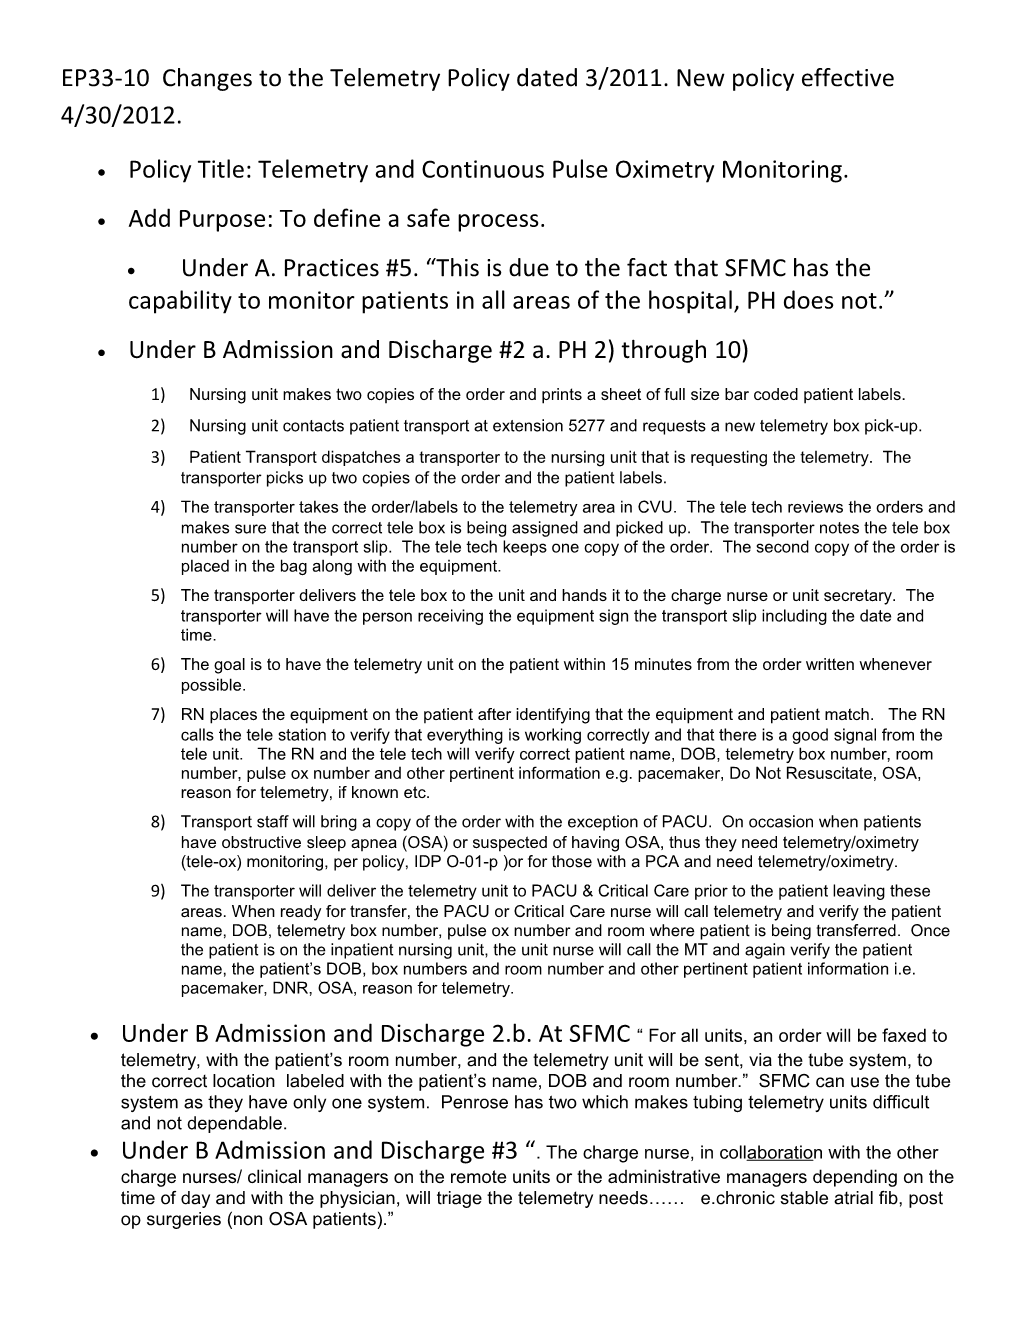 EP33-10 Changes to the Telemetry Policy Dated 3/2011. New Policy Effective 4/30/2012